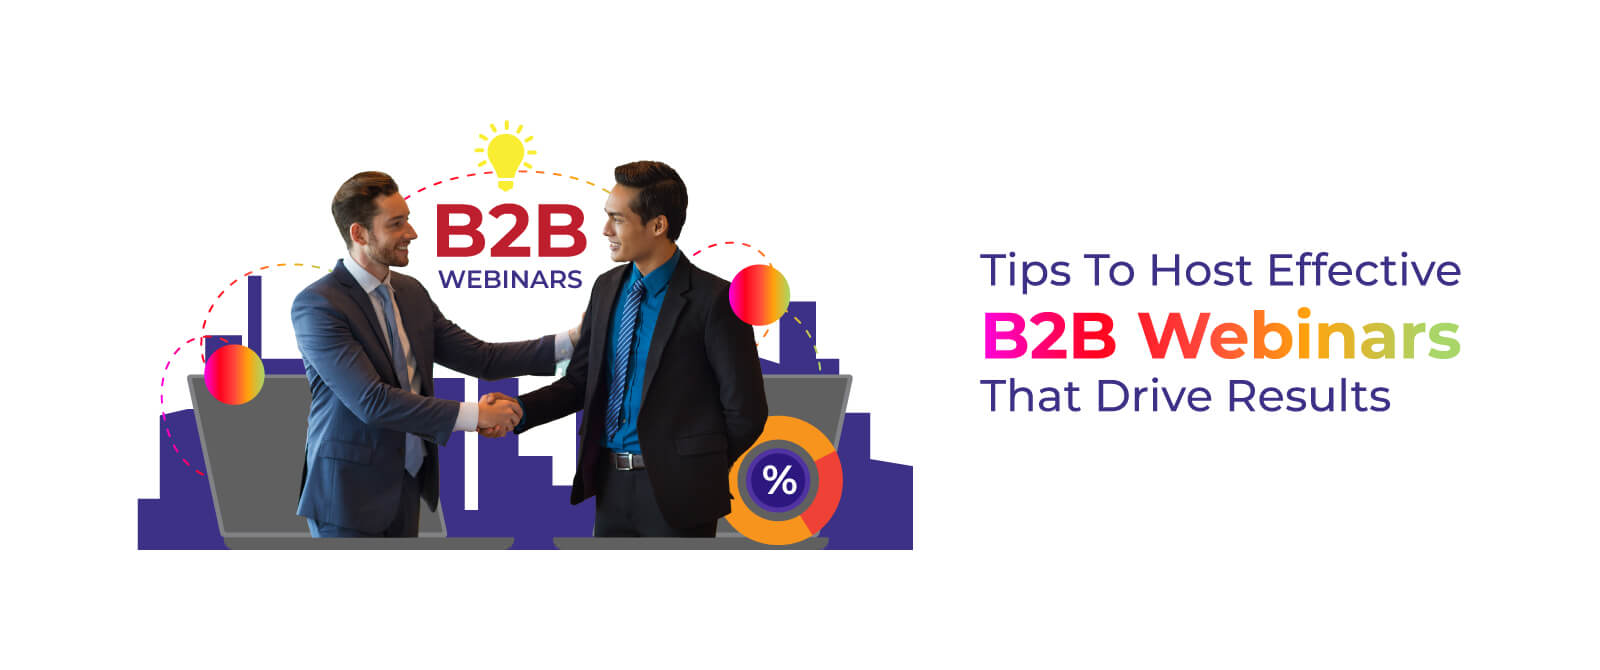 Tips To Host Effective B2B Webinars That Drive Results